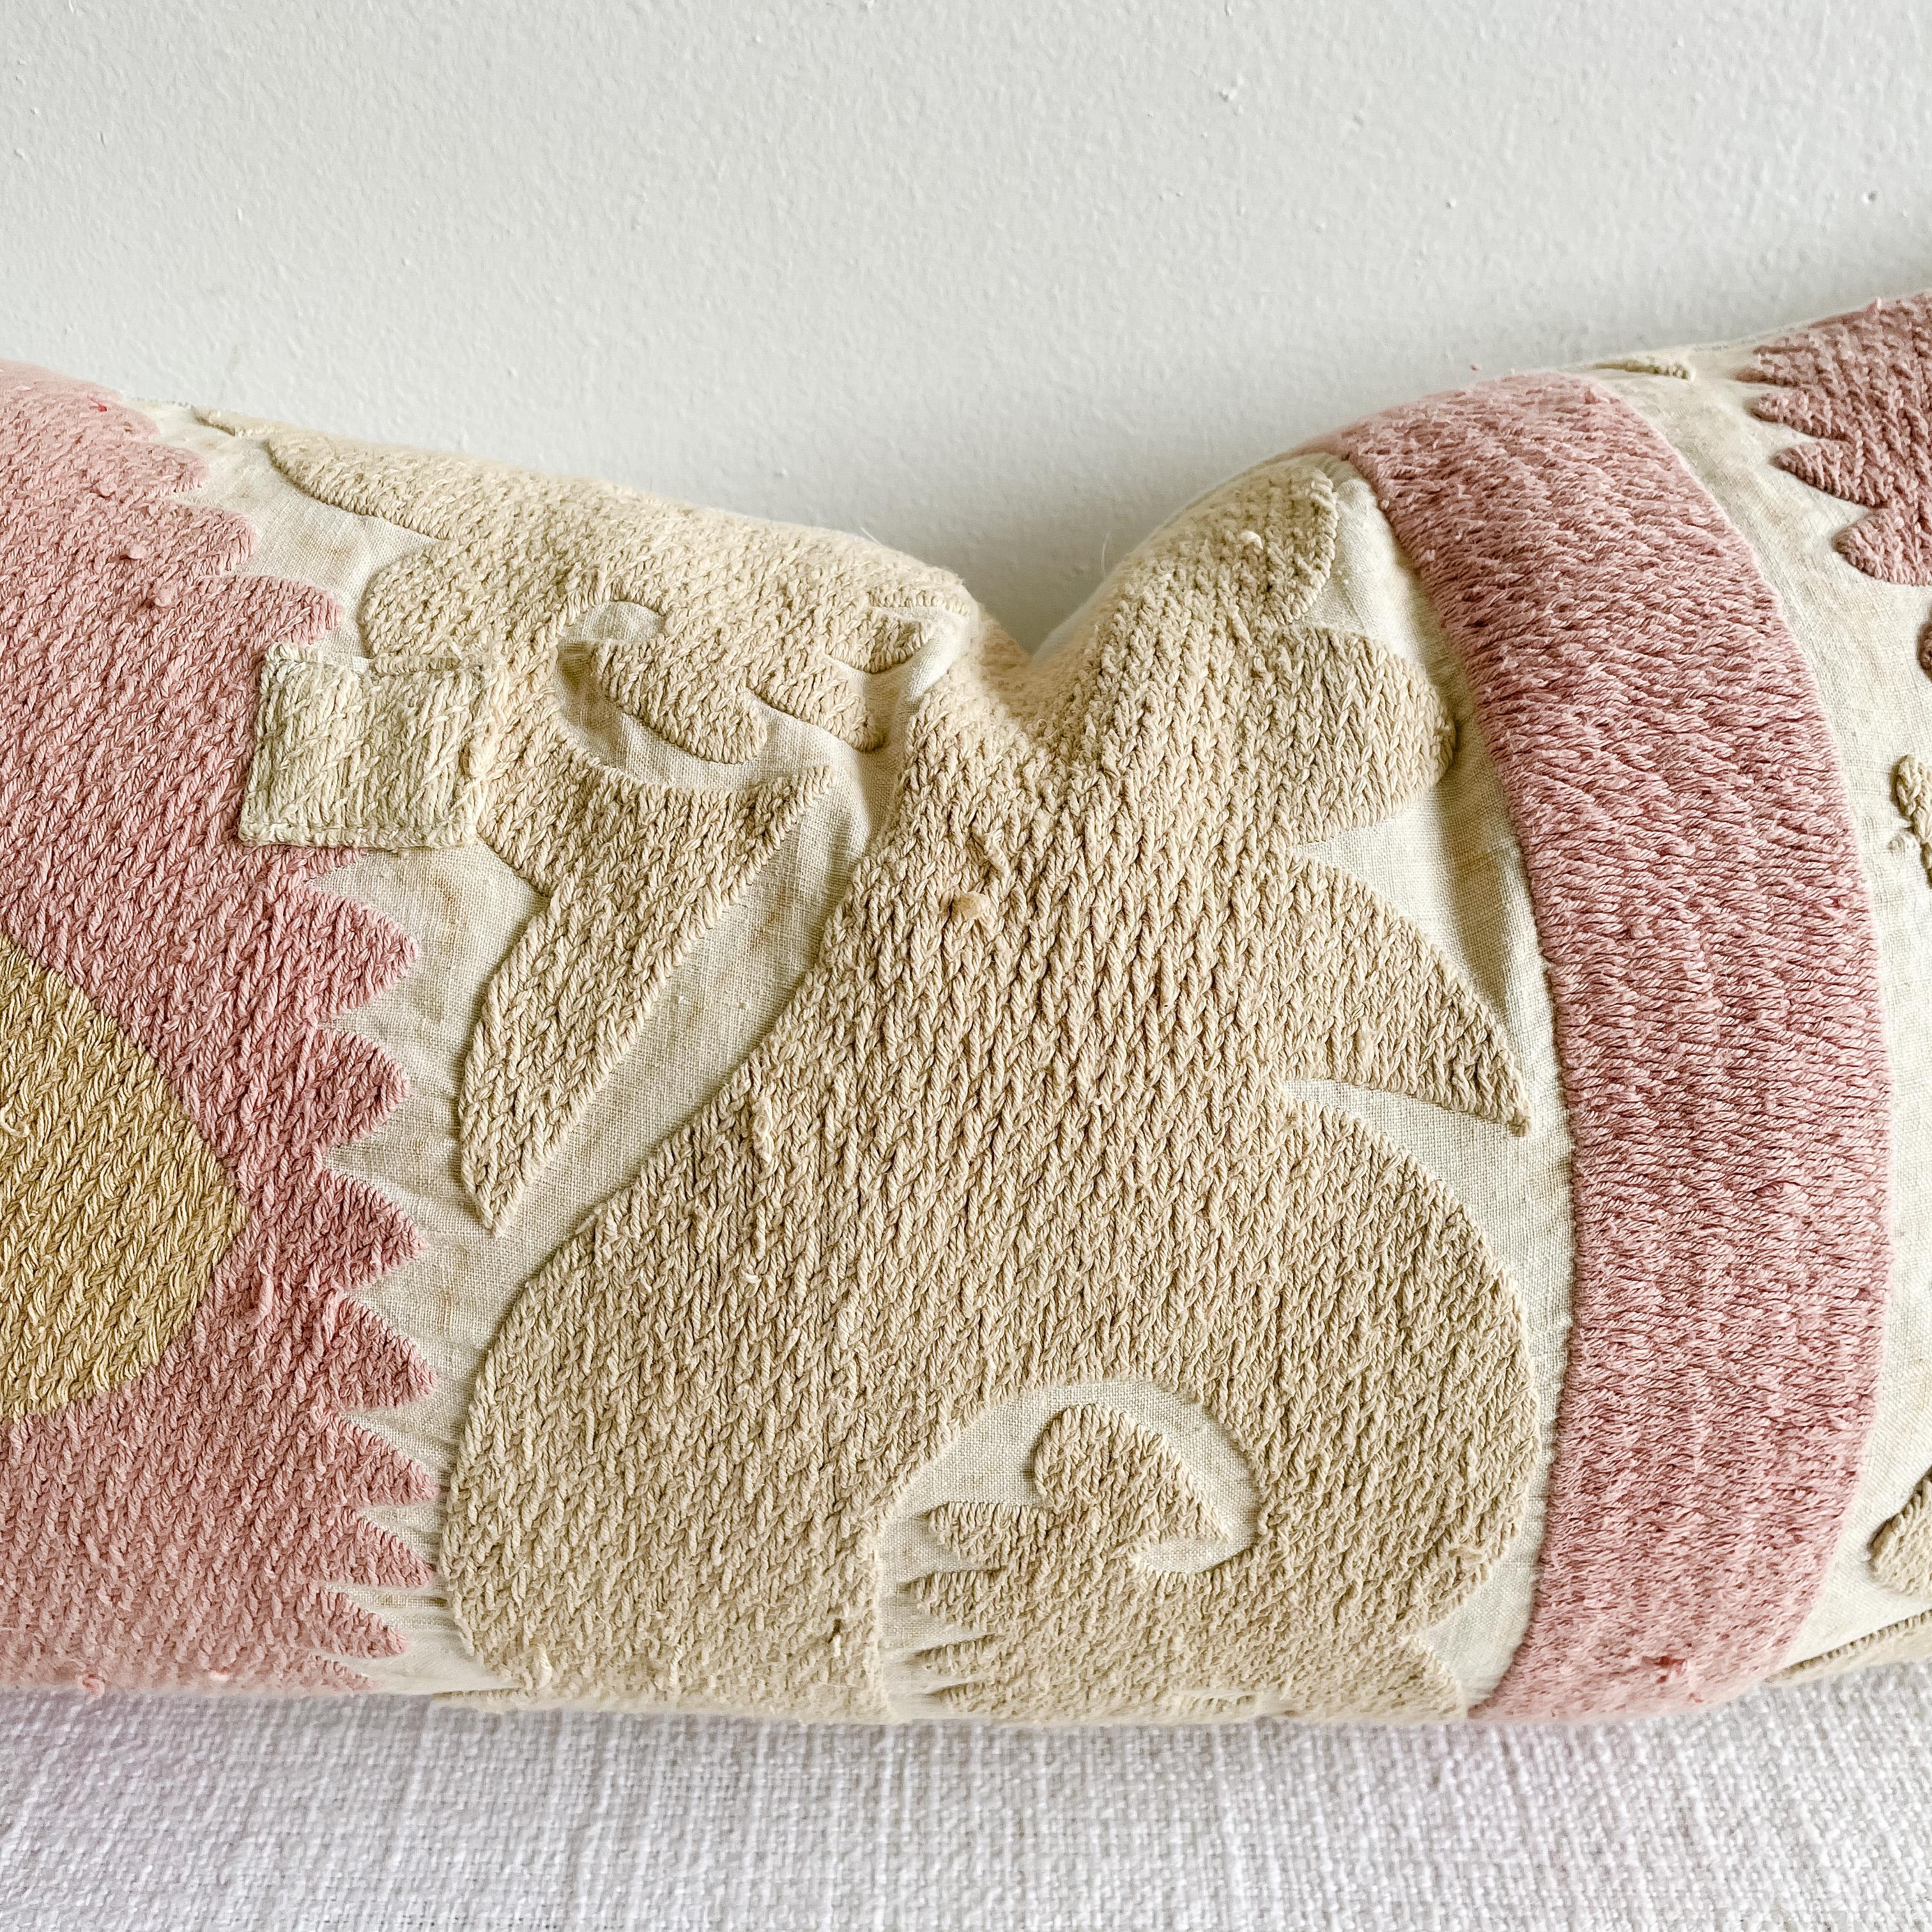 Vintage pale pink and tan embroidered Suzani on a natural muslin background.
This vintage textile pillow face features a vintage Suzann quilt, natural linen colored background with original hand embroidery. The backing is 100% Belgian linen in